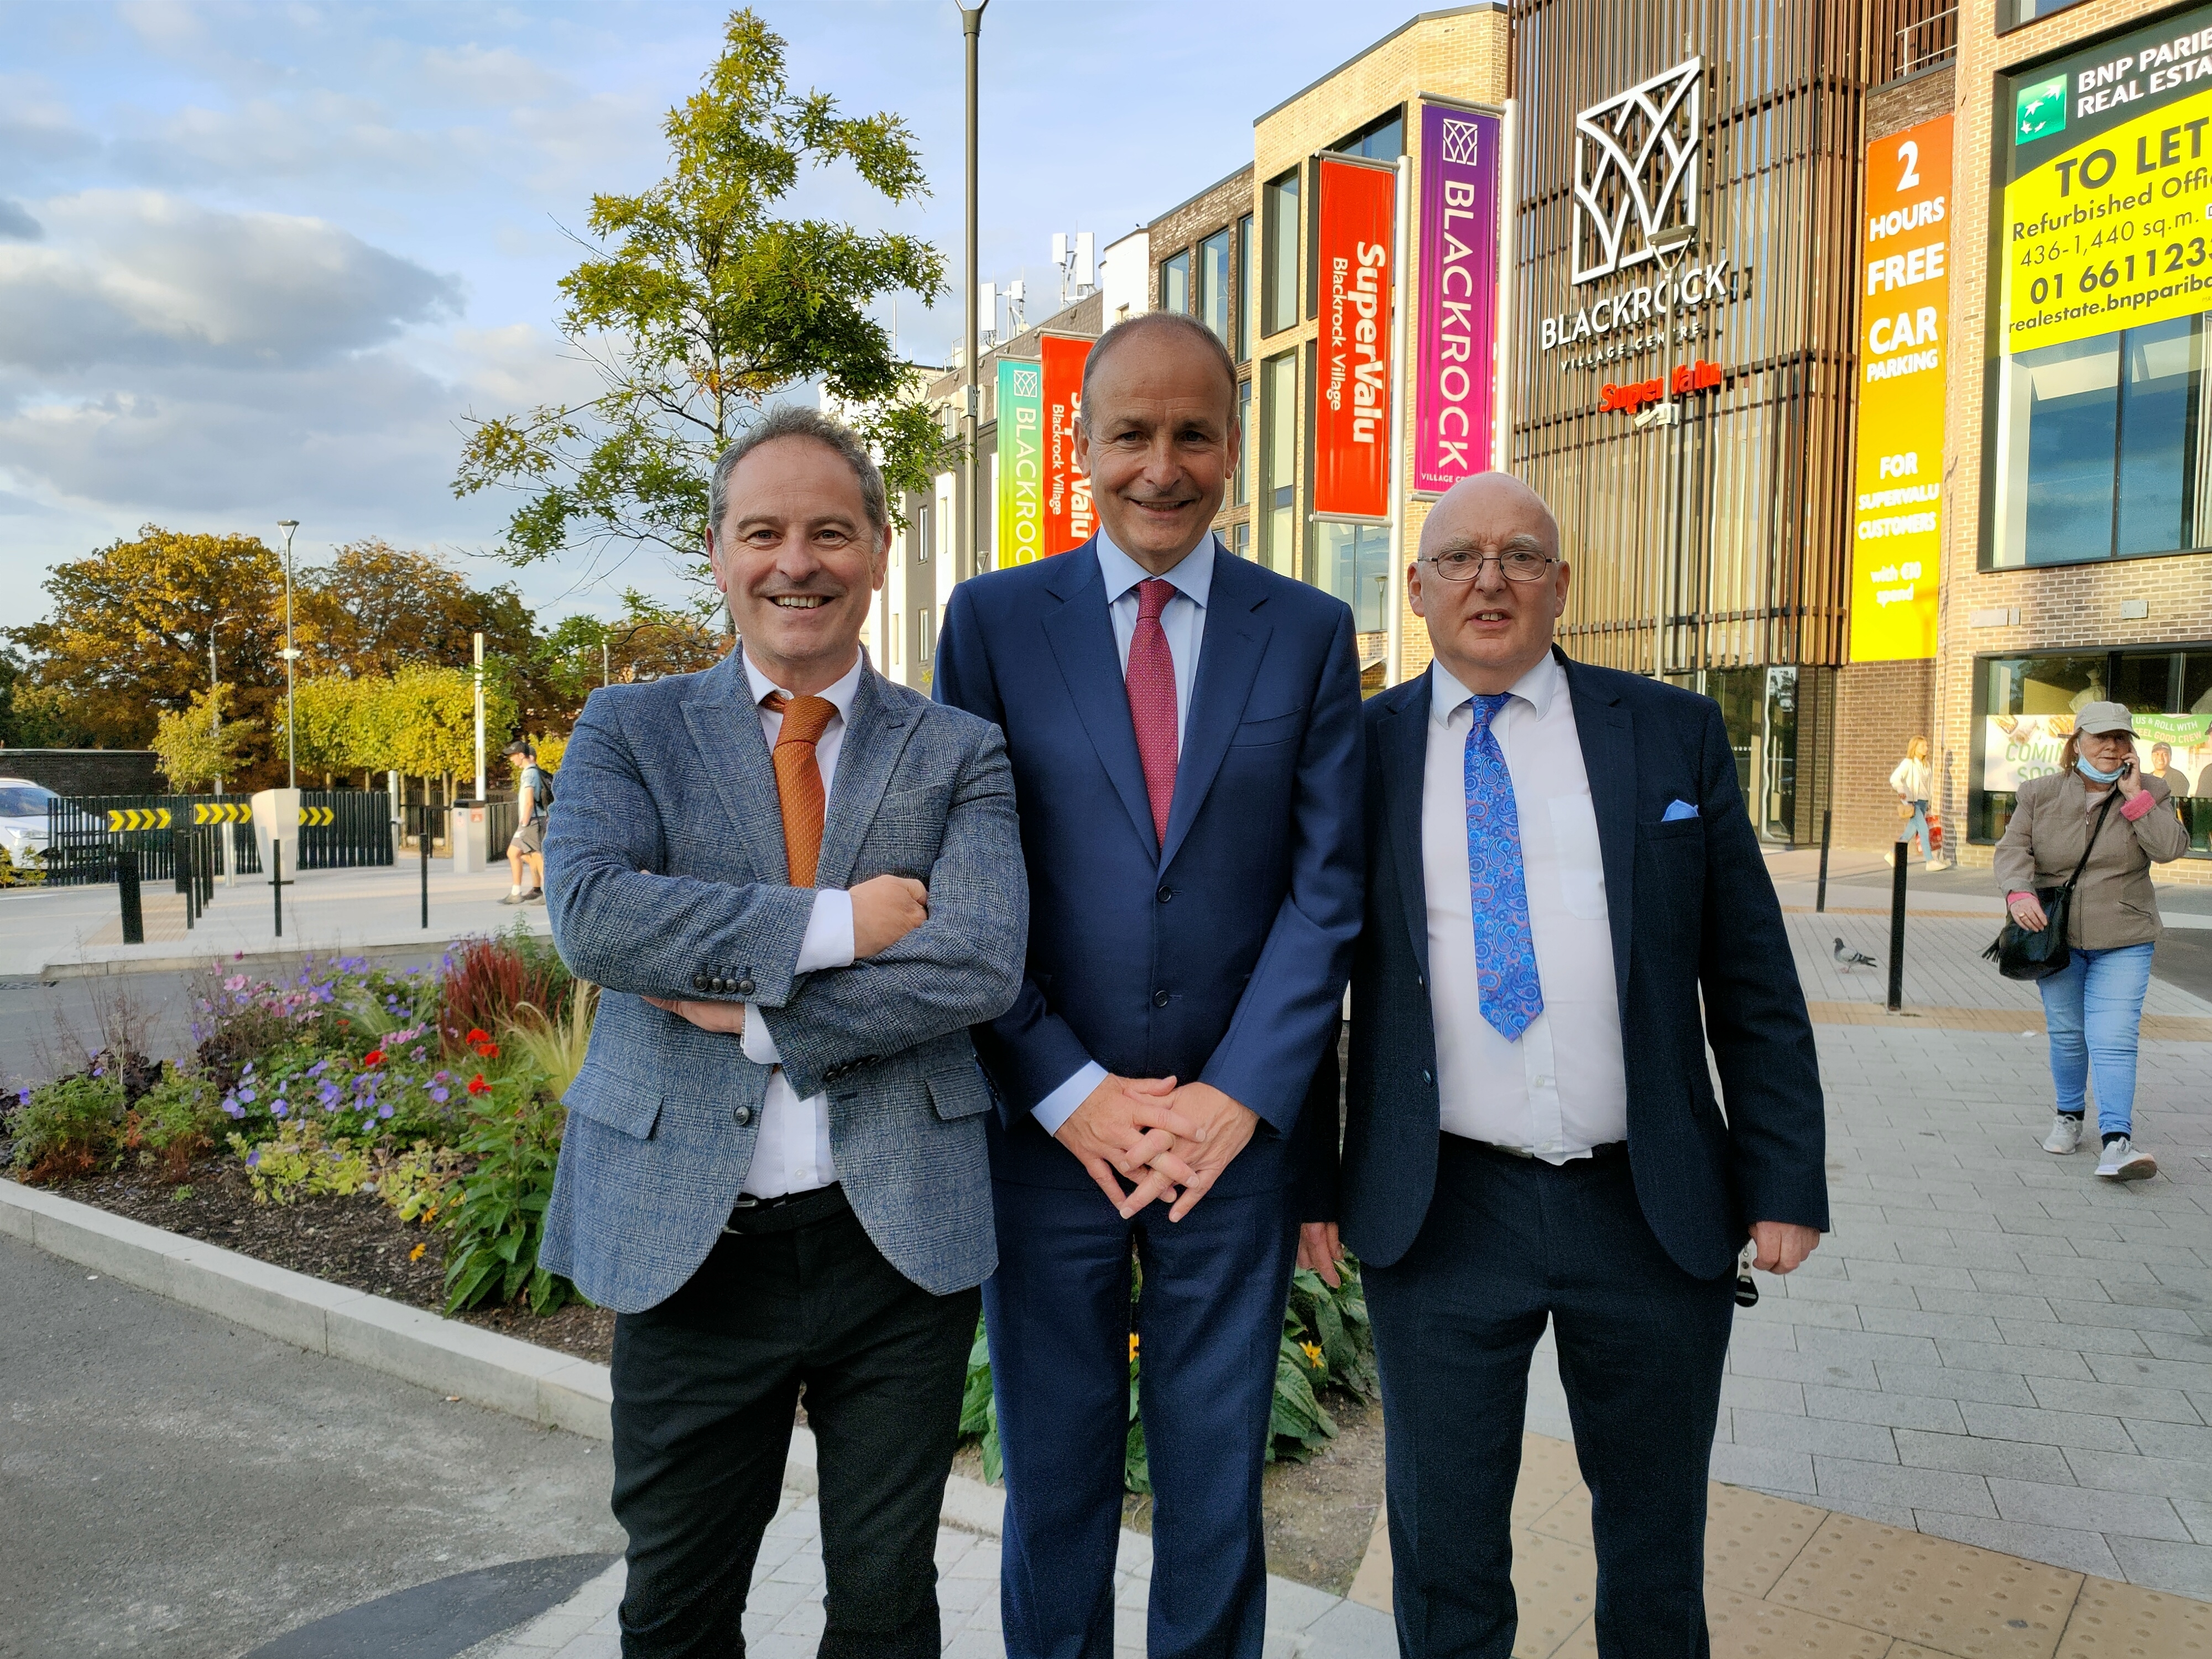 Special Visitor to Blackrock Village Centre An Taoiseach, Mr Micheál Martin T.D. managed to take time out of a busy schedule to pay a flash visit to Blackrock Village Centre and receive a warm welcome from Centre Manager Seamus Carroll and Michael Hayes of the centre management office.